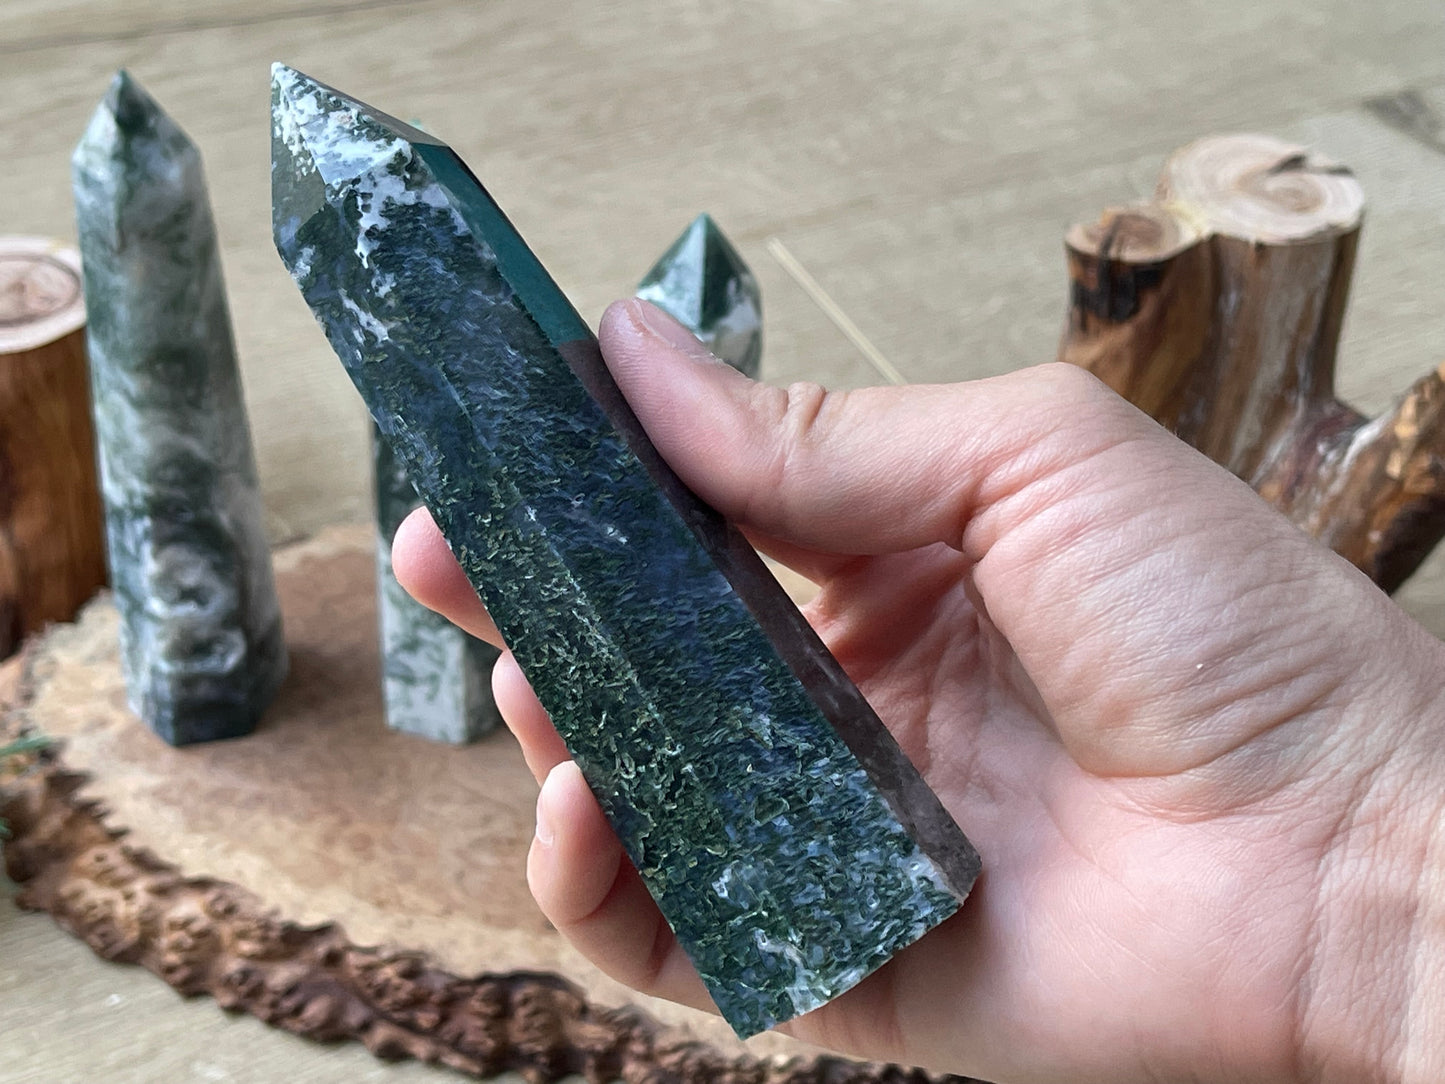 Moss agate large druzy towers